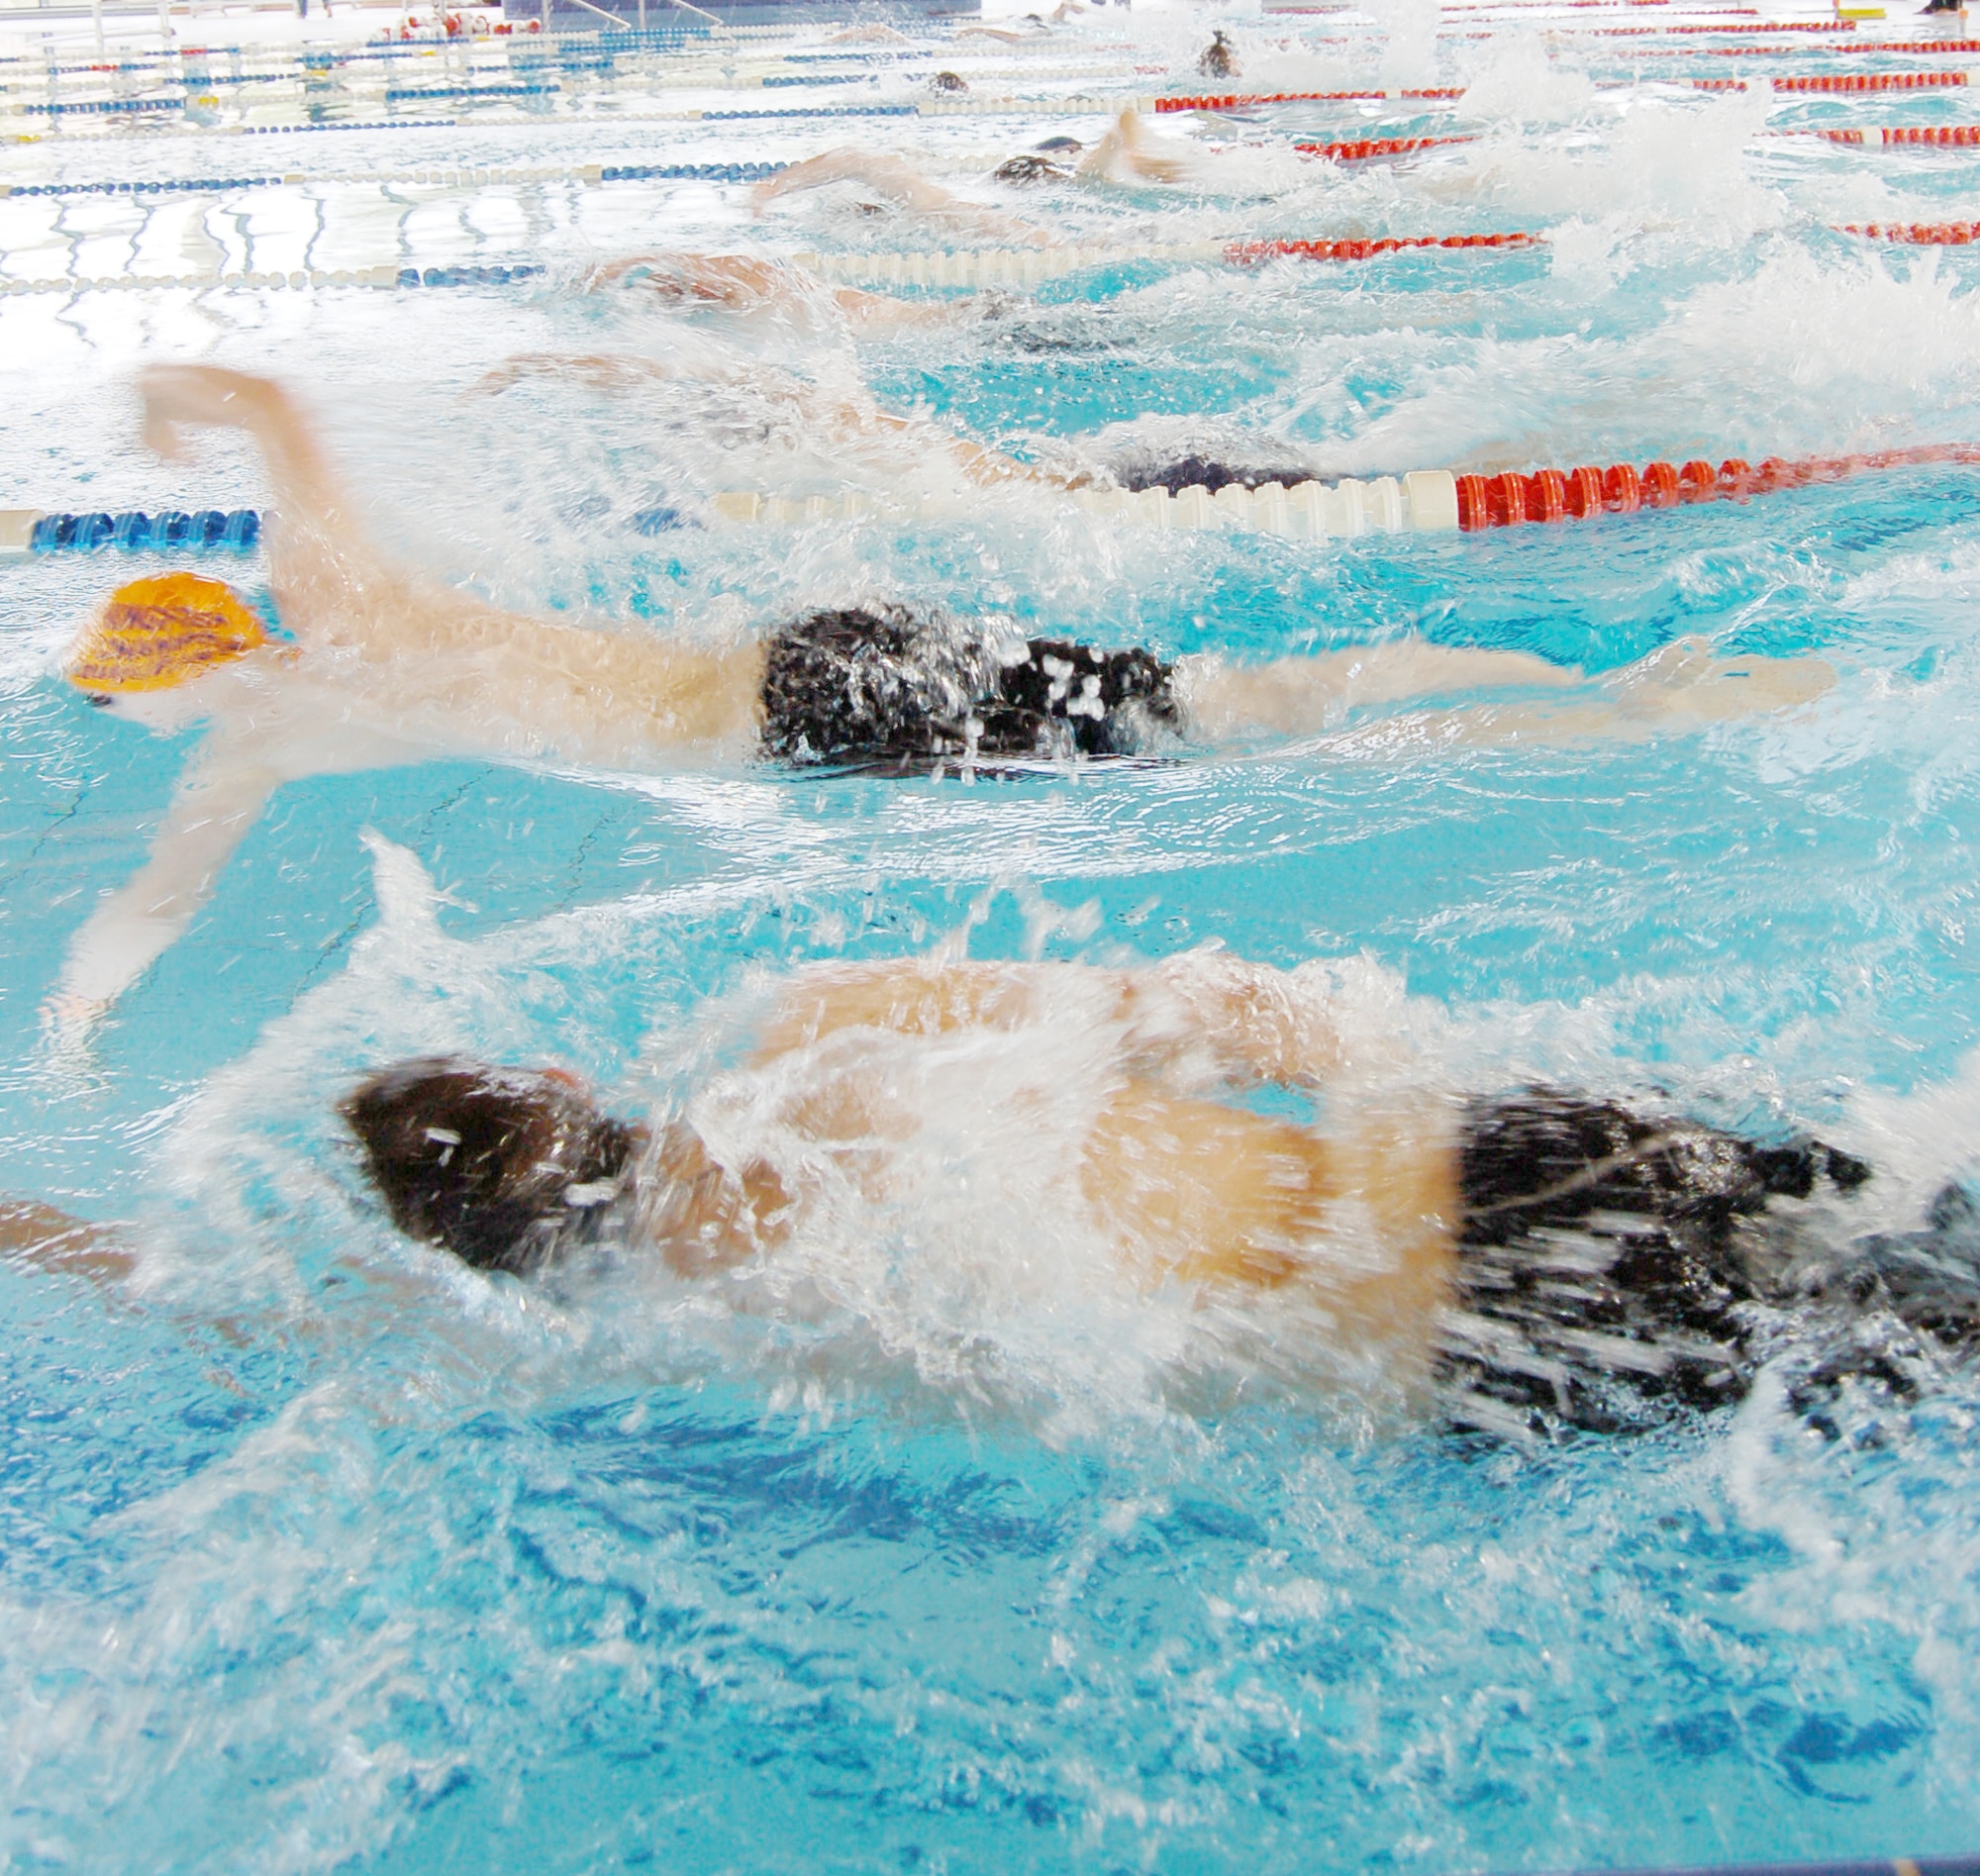 Youth compete in the third heat of the swimming portion during the second annual FitFactor Triathlon May 2, 2010, at Ramstein Air Base, Germany. Participants swam either 200 or 500 meters, depending on their age category. (U.S. Air Force photo/Senior Airman Amanda Dick)